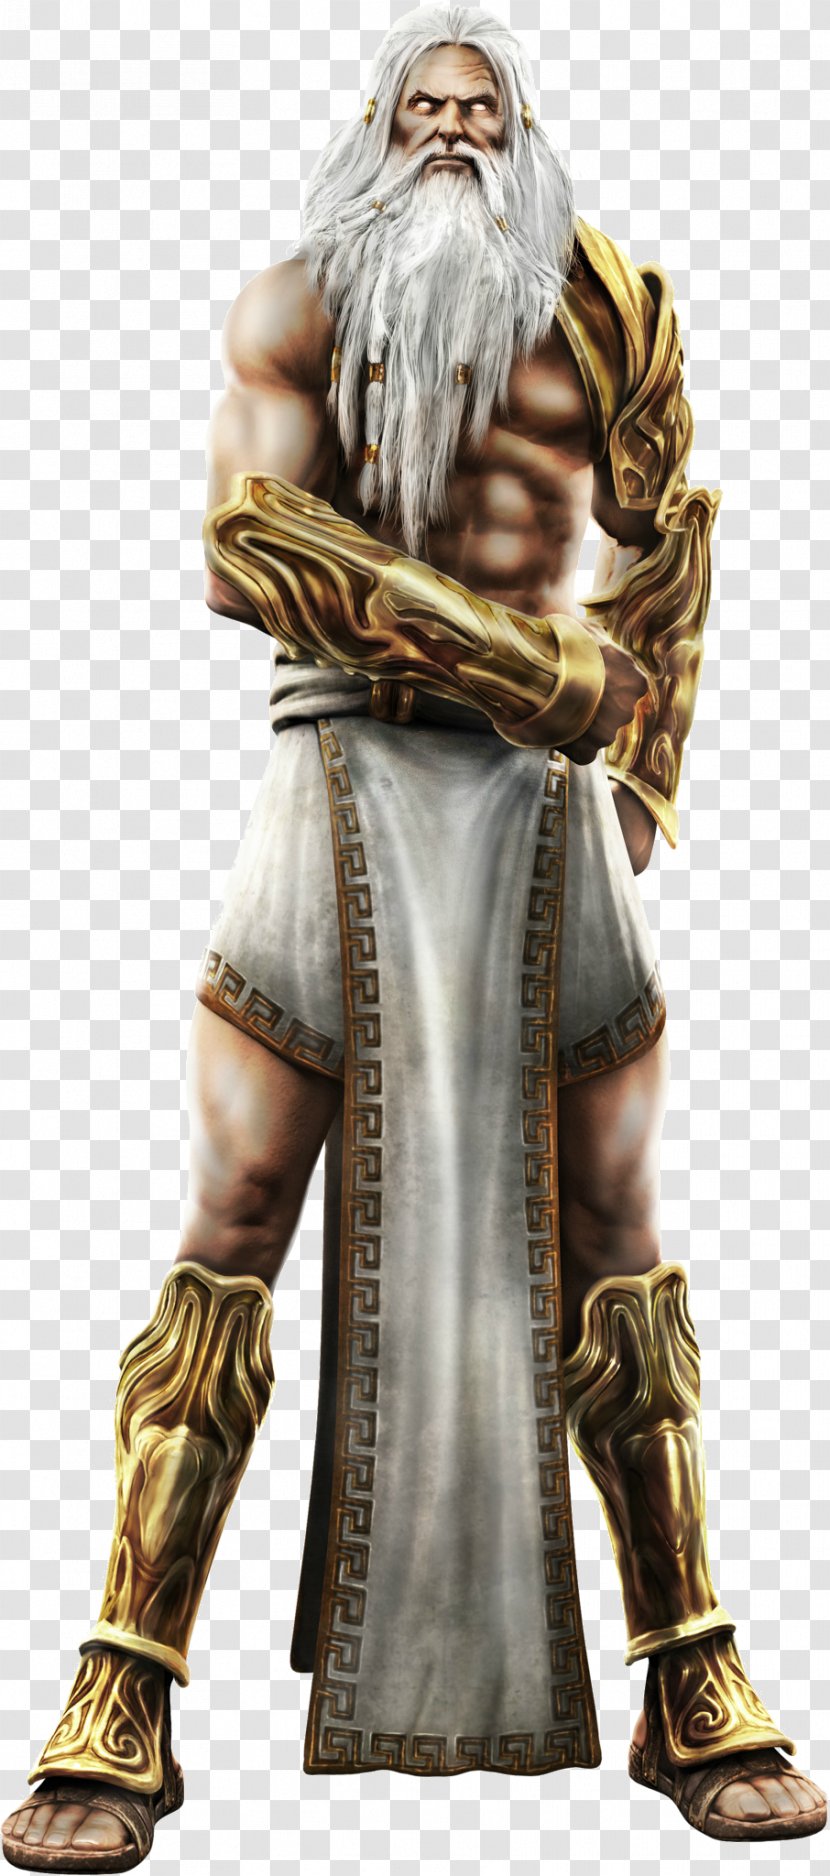 God Of War III War: Ascension Chains Olympus - Figurine Transparent PNG